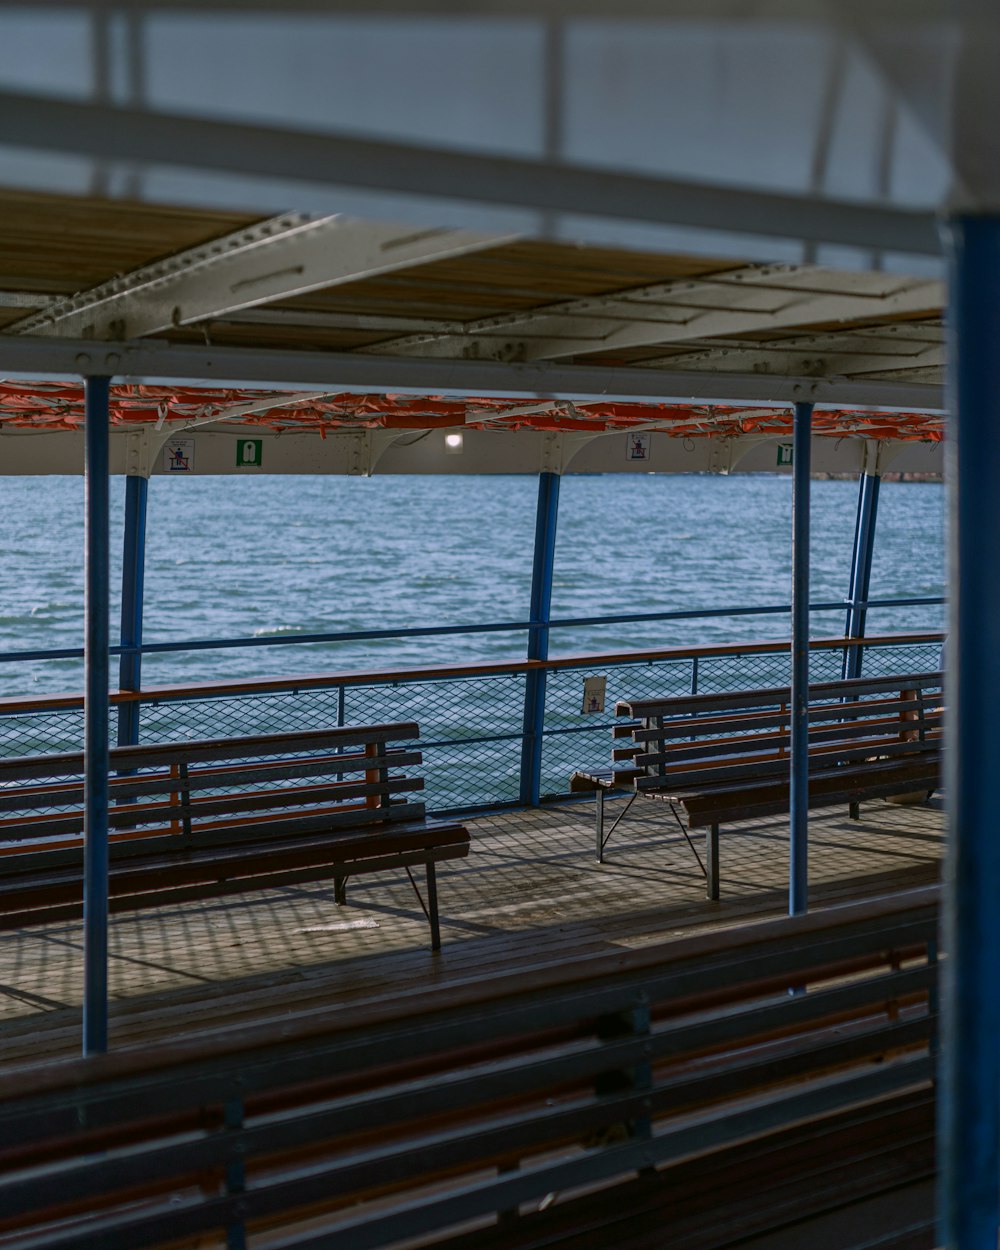 a row of benches sitting next to a body of water